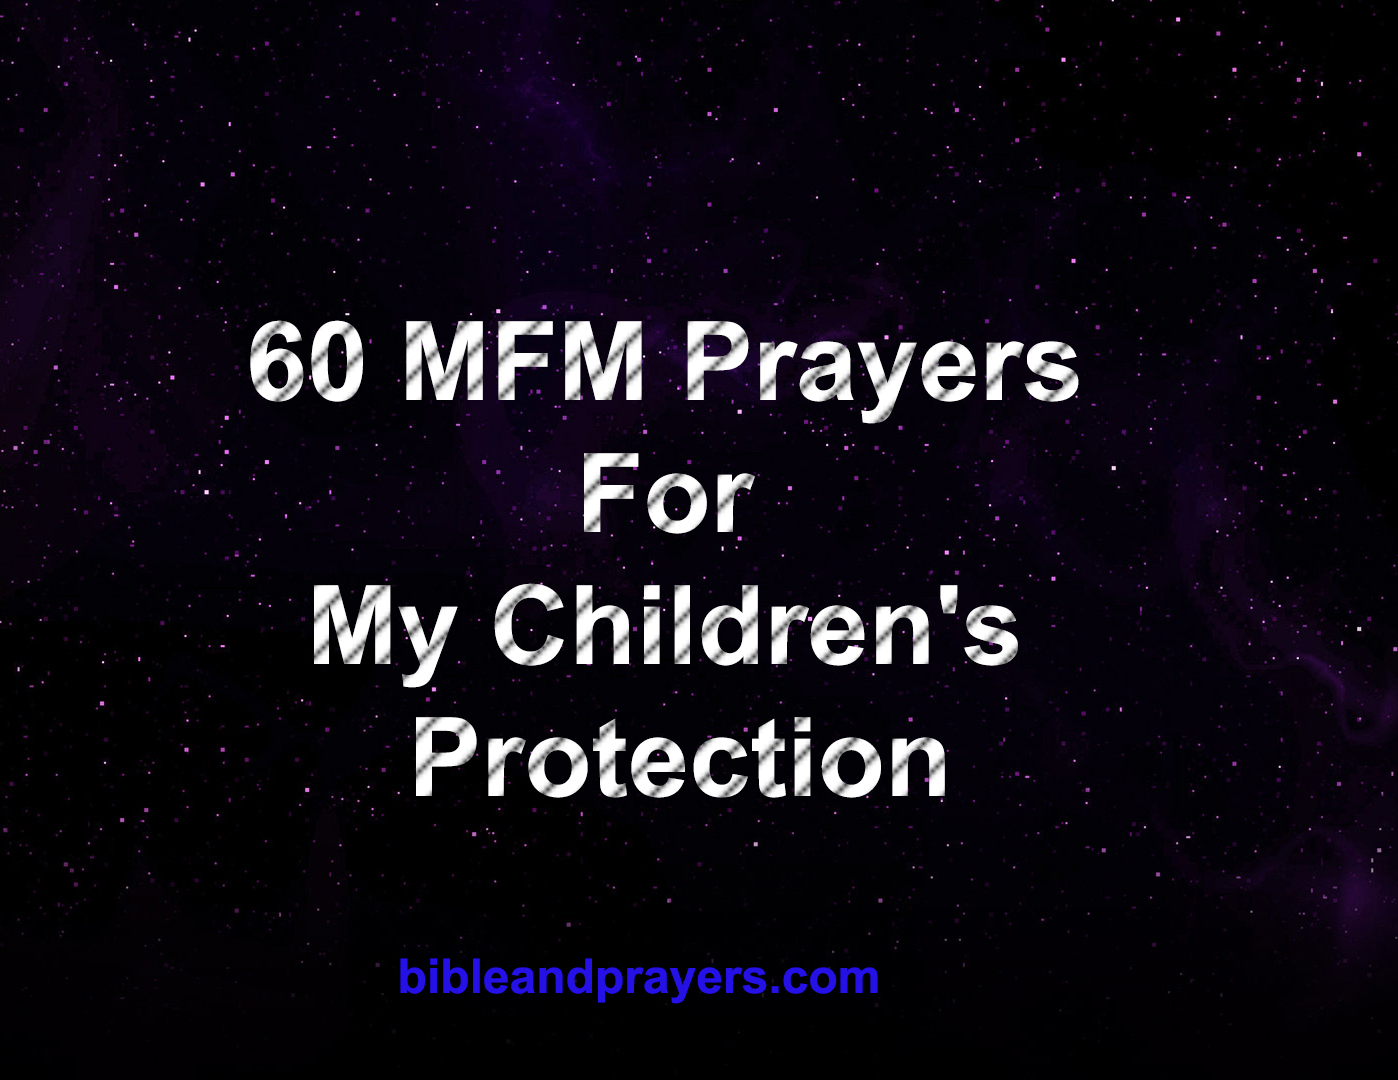 60 MFM Prayers For My Children's Protection